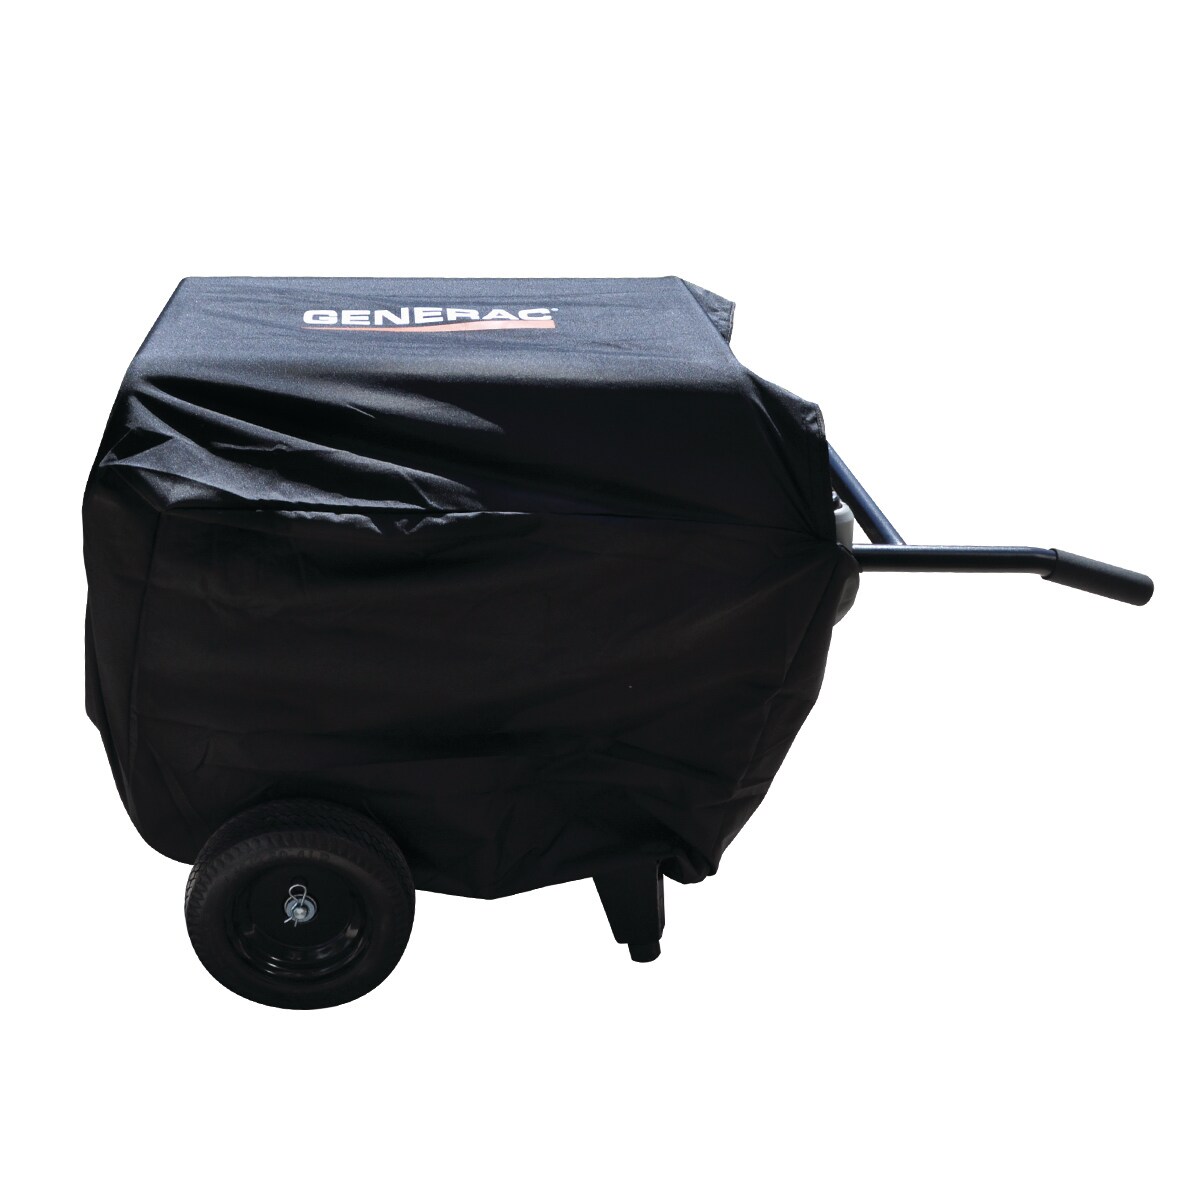 Generac 6811 5KW 8KW Portable Storage Cover for sale online 